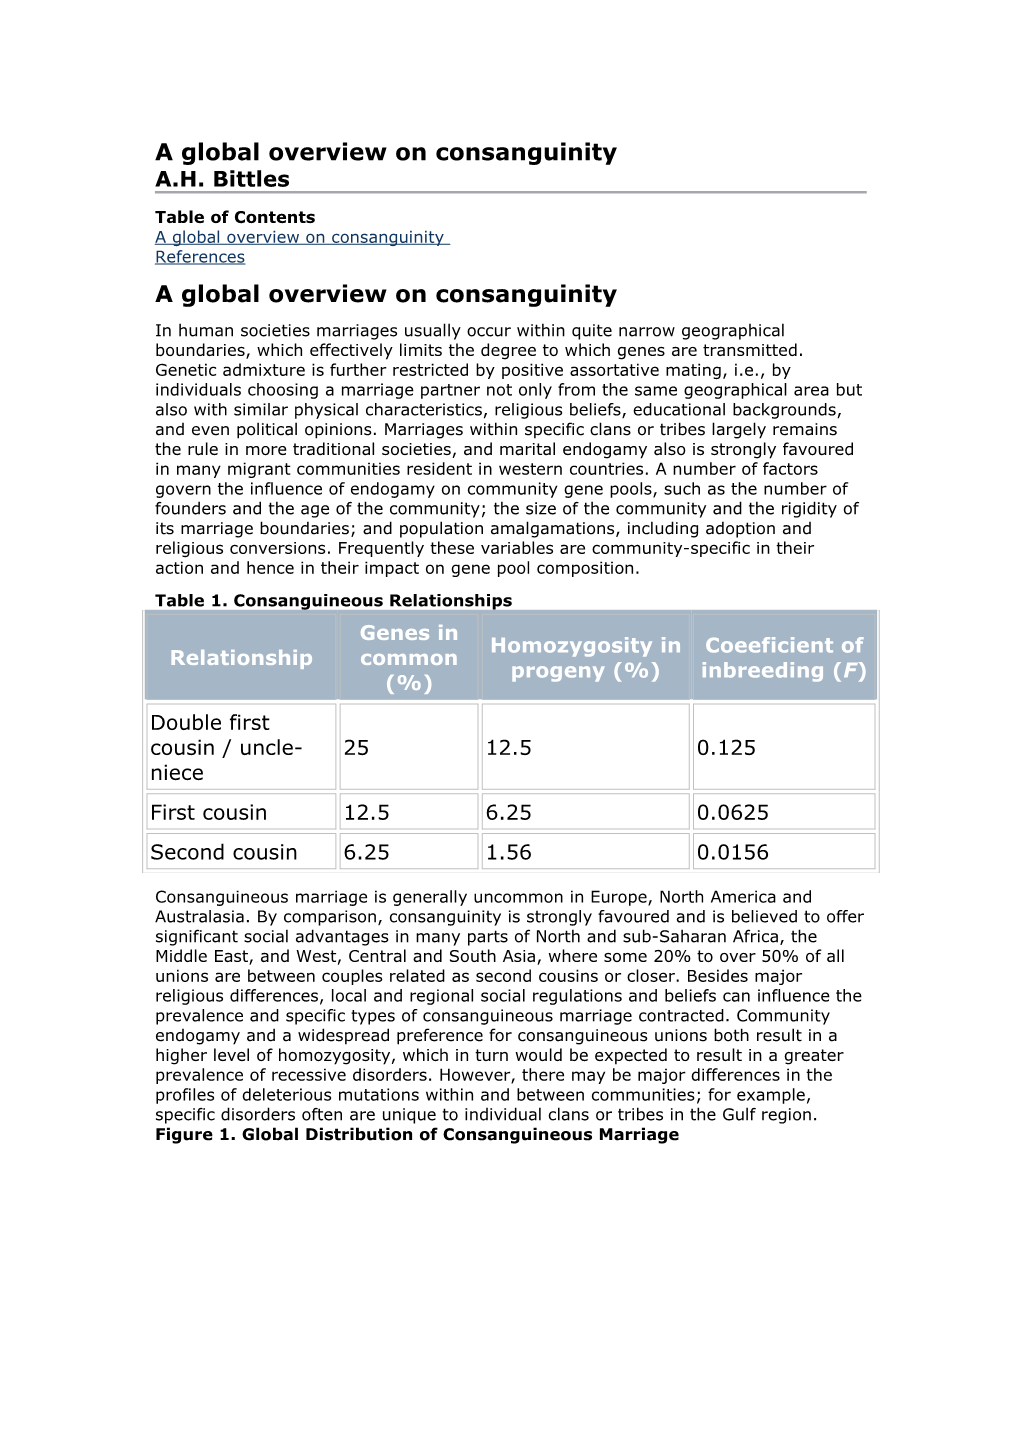 A Global Overview on Consanguinity